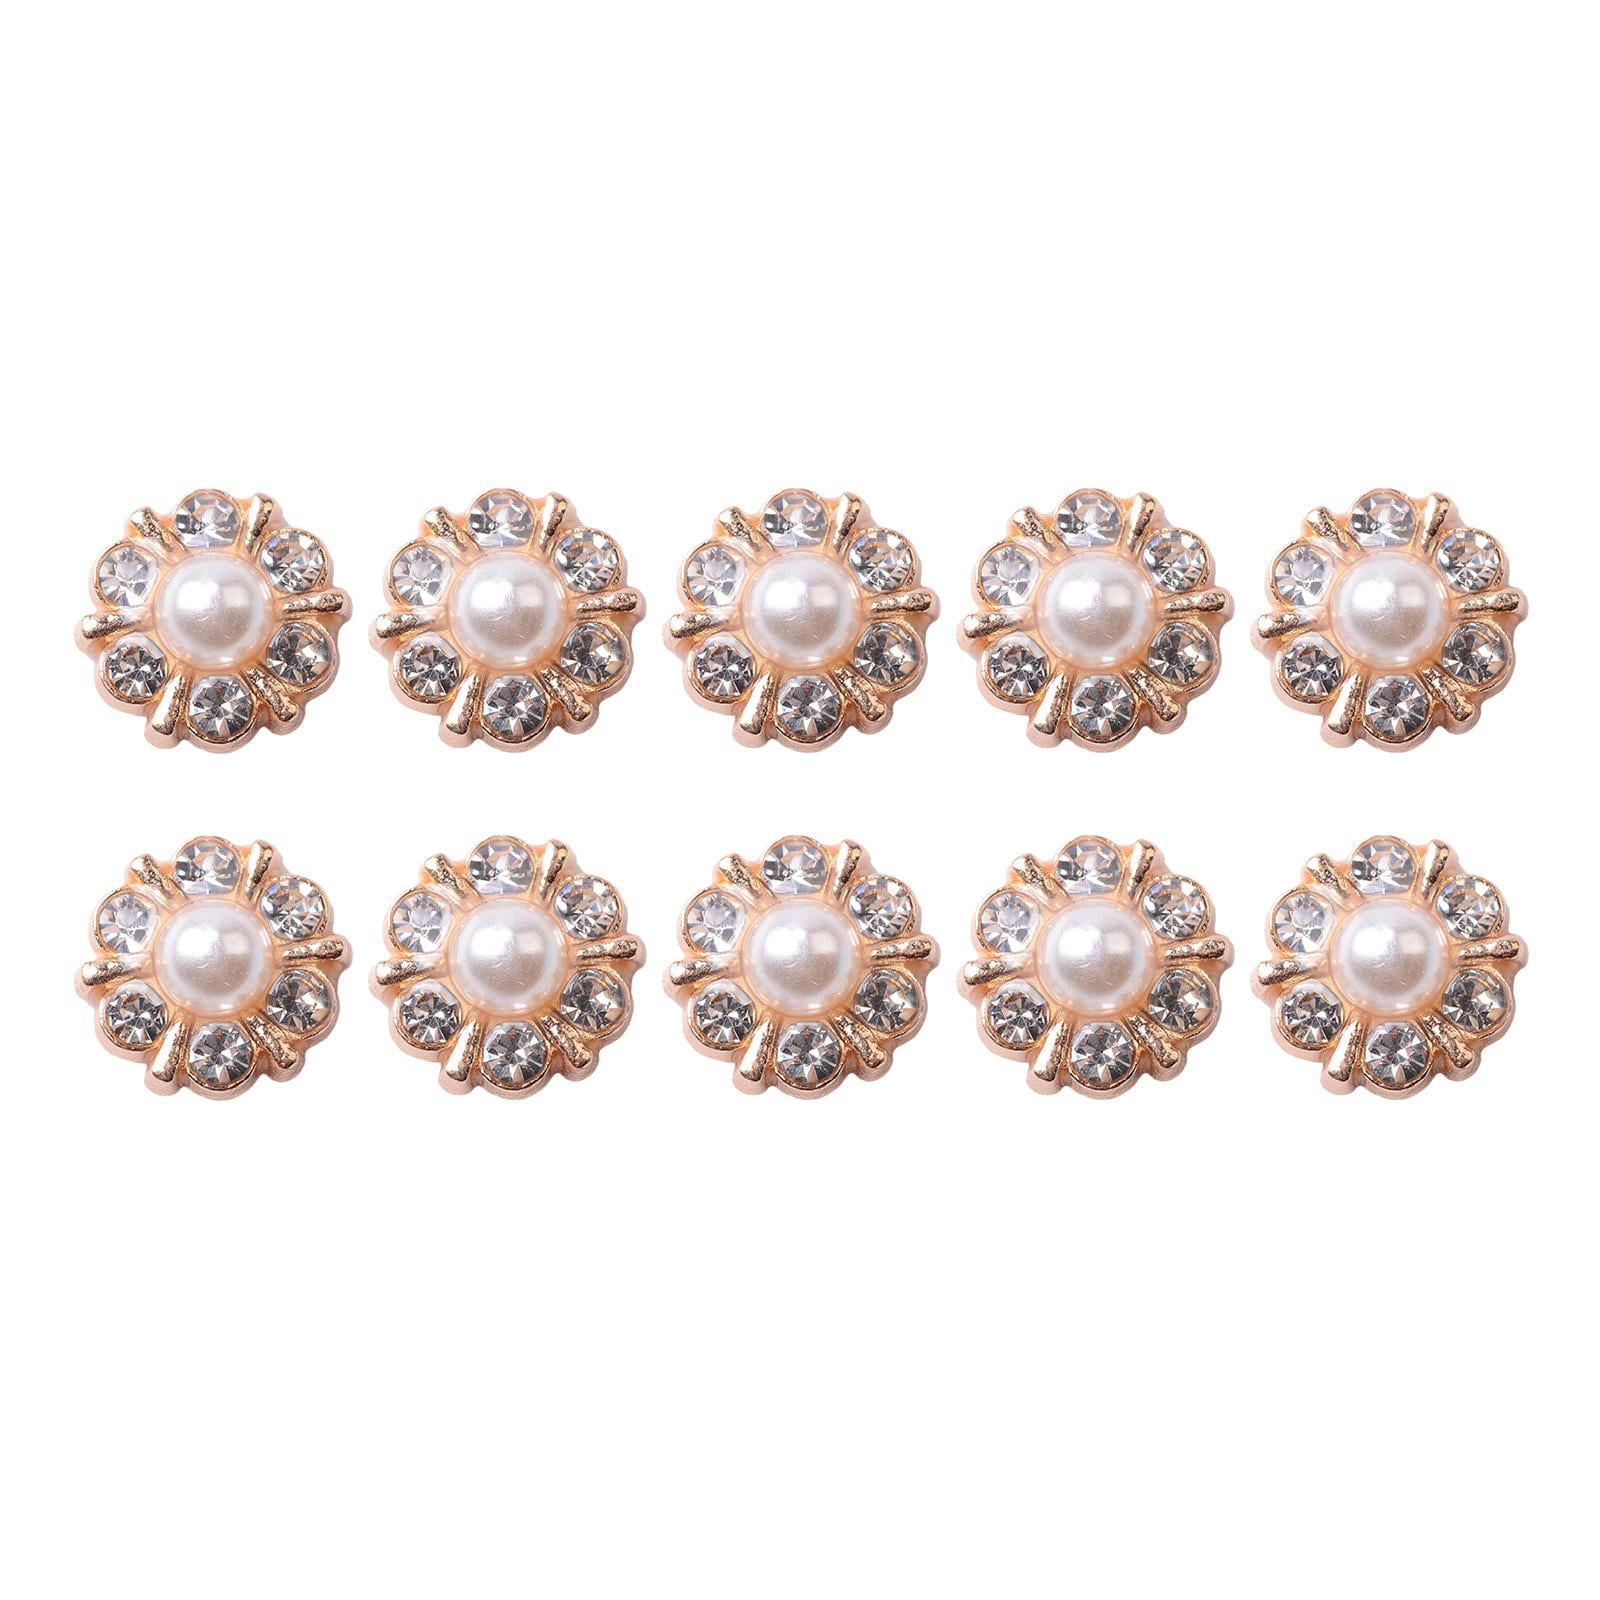 Since 14mm 100pcs Flower Shape Claw Cup Sew on Rhinestone Button, Crystal  Glass Beads Buttons for Jewelry Making, Furniture, Earring, Garment